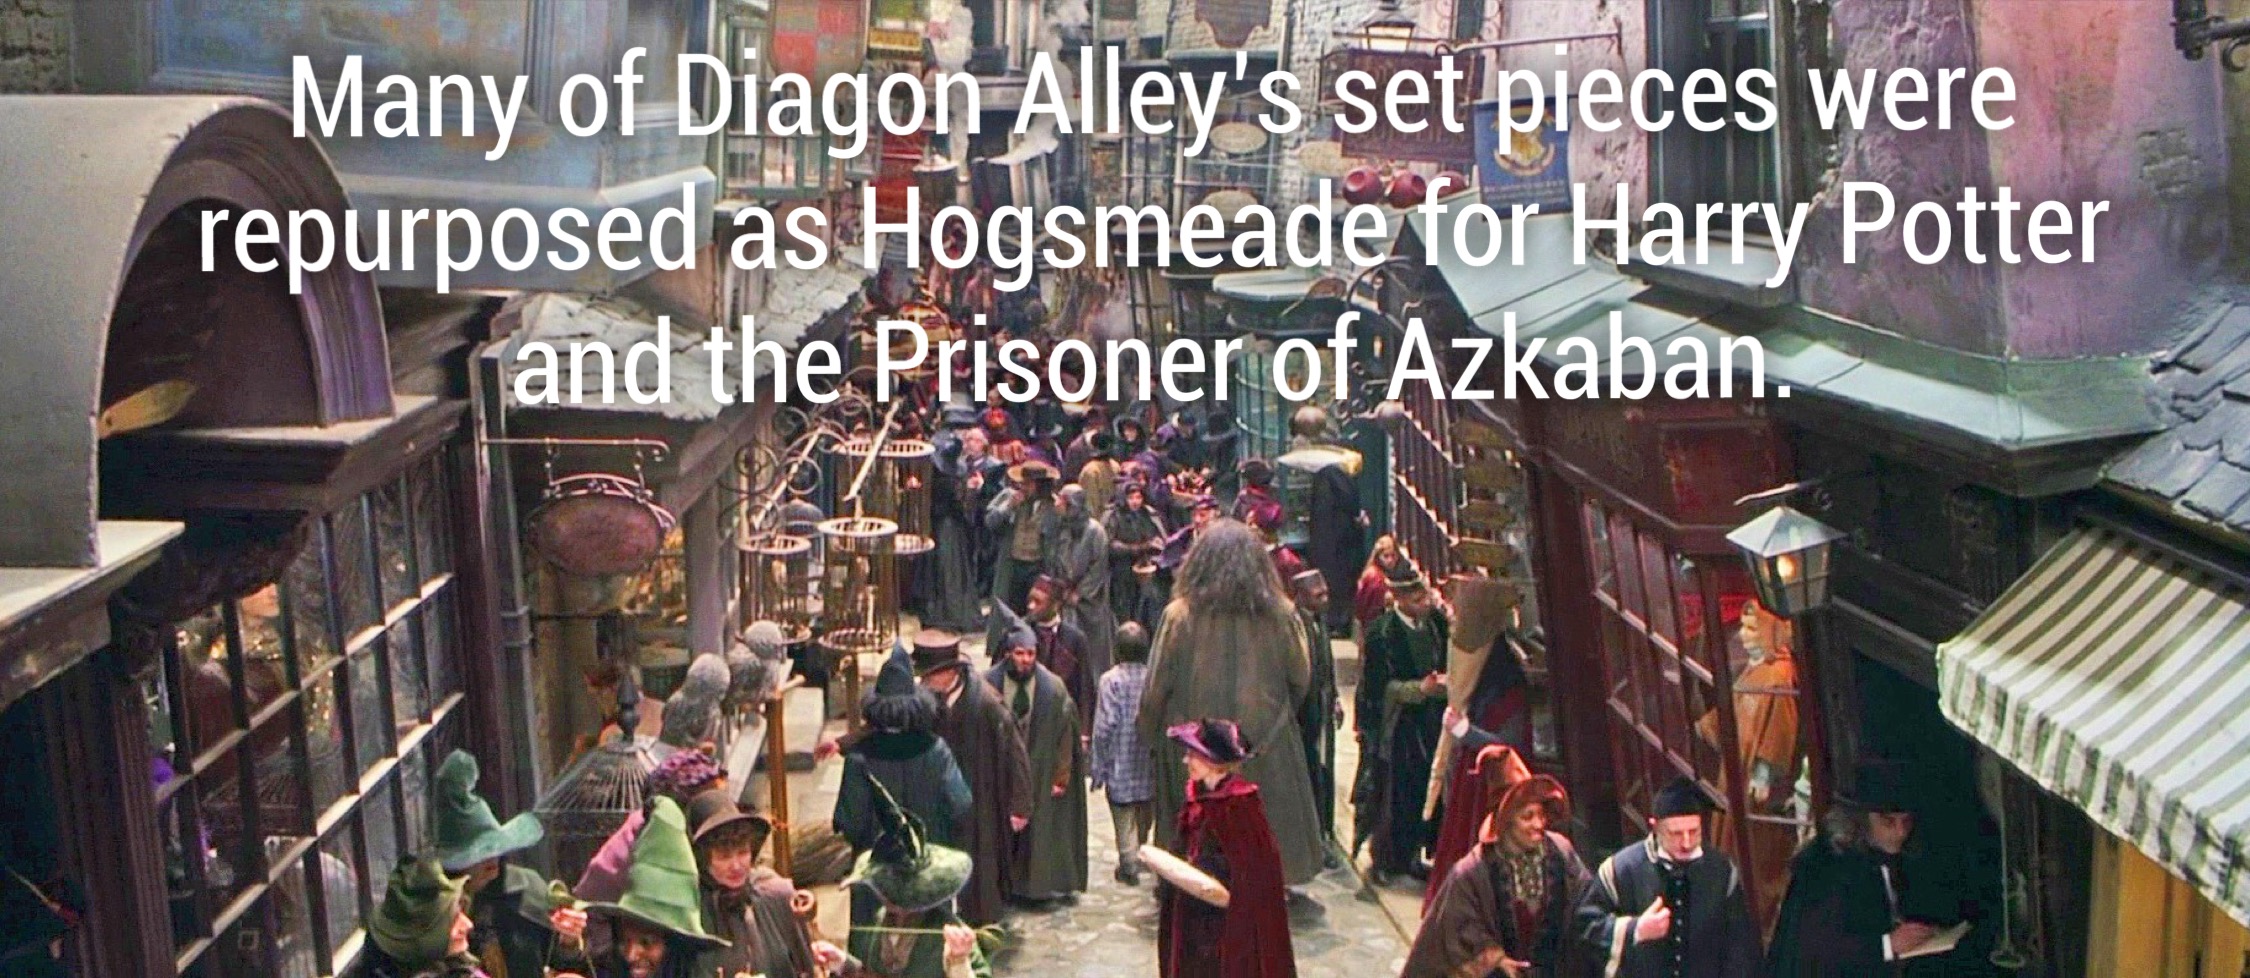 diagon alley harry potter - Many of Diagon Alley's set pieces were repurposed as Hogsmeade for Harry Potter and the Prisoner of Azkaban.